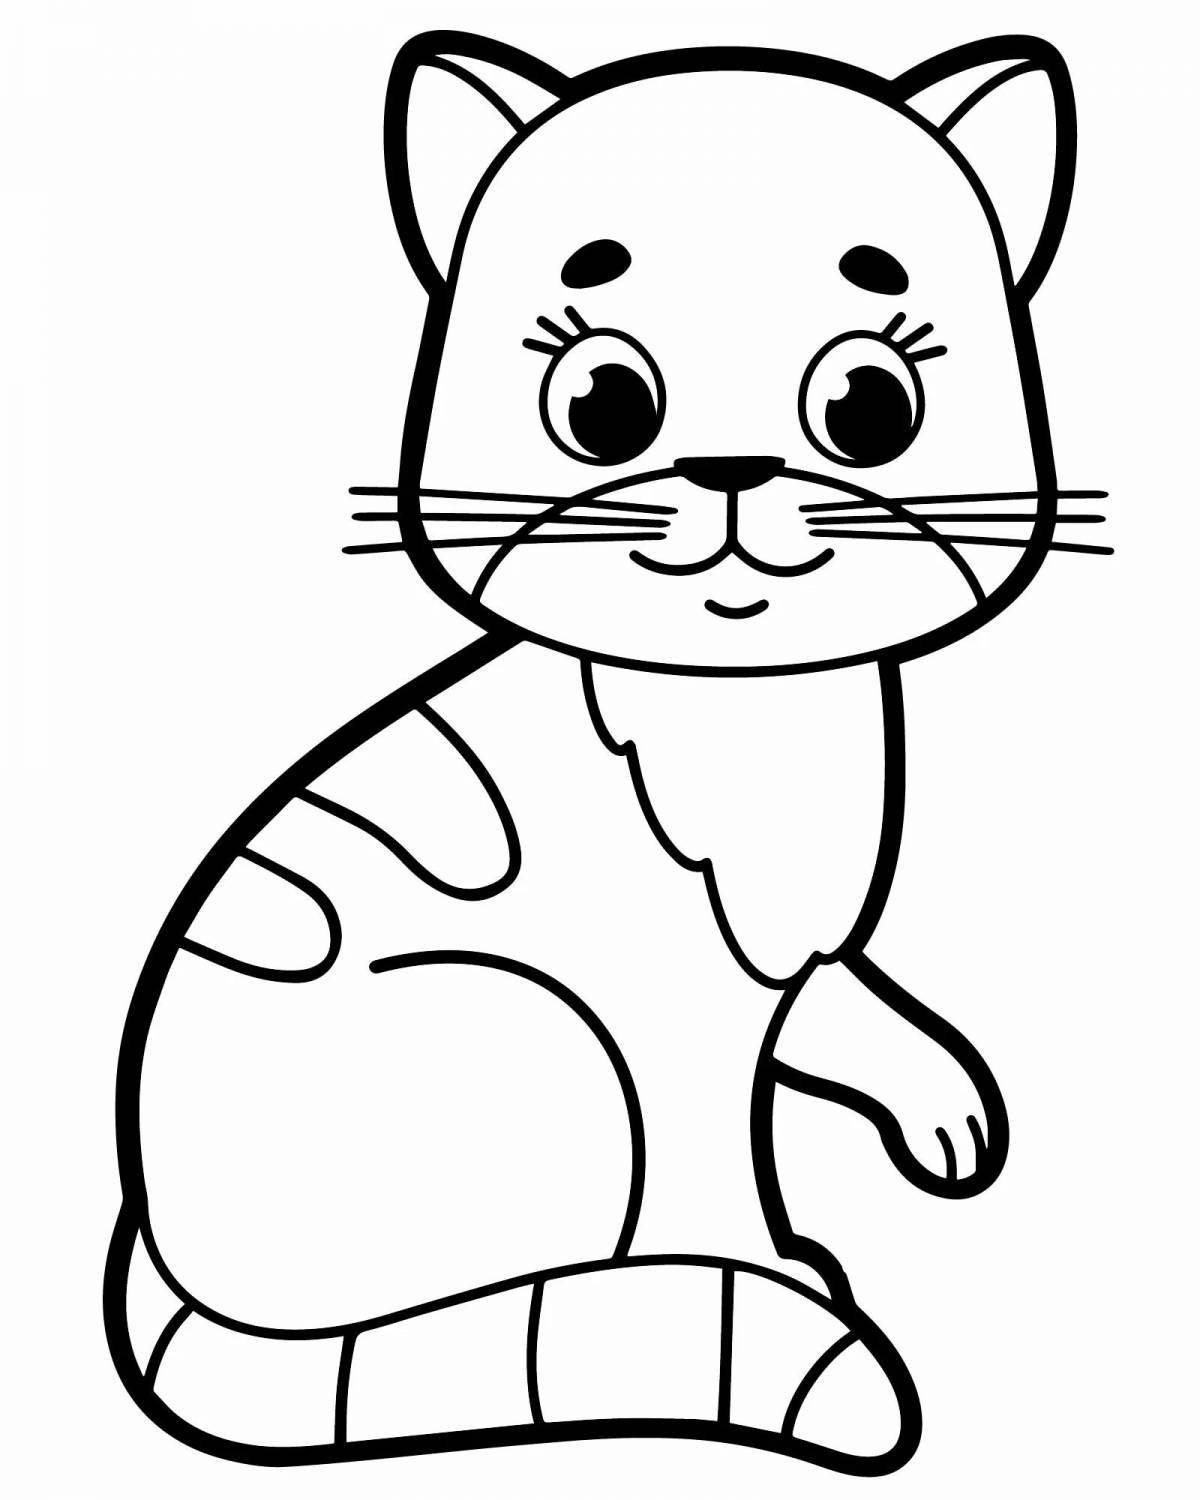 Loving coloring cat for children 2-3 years old